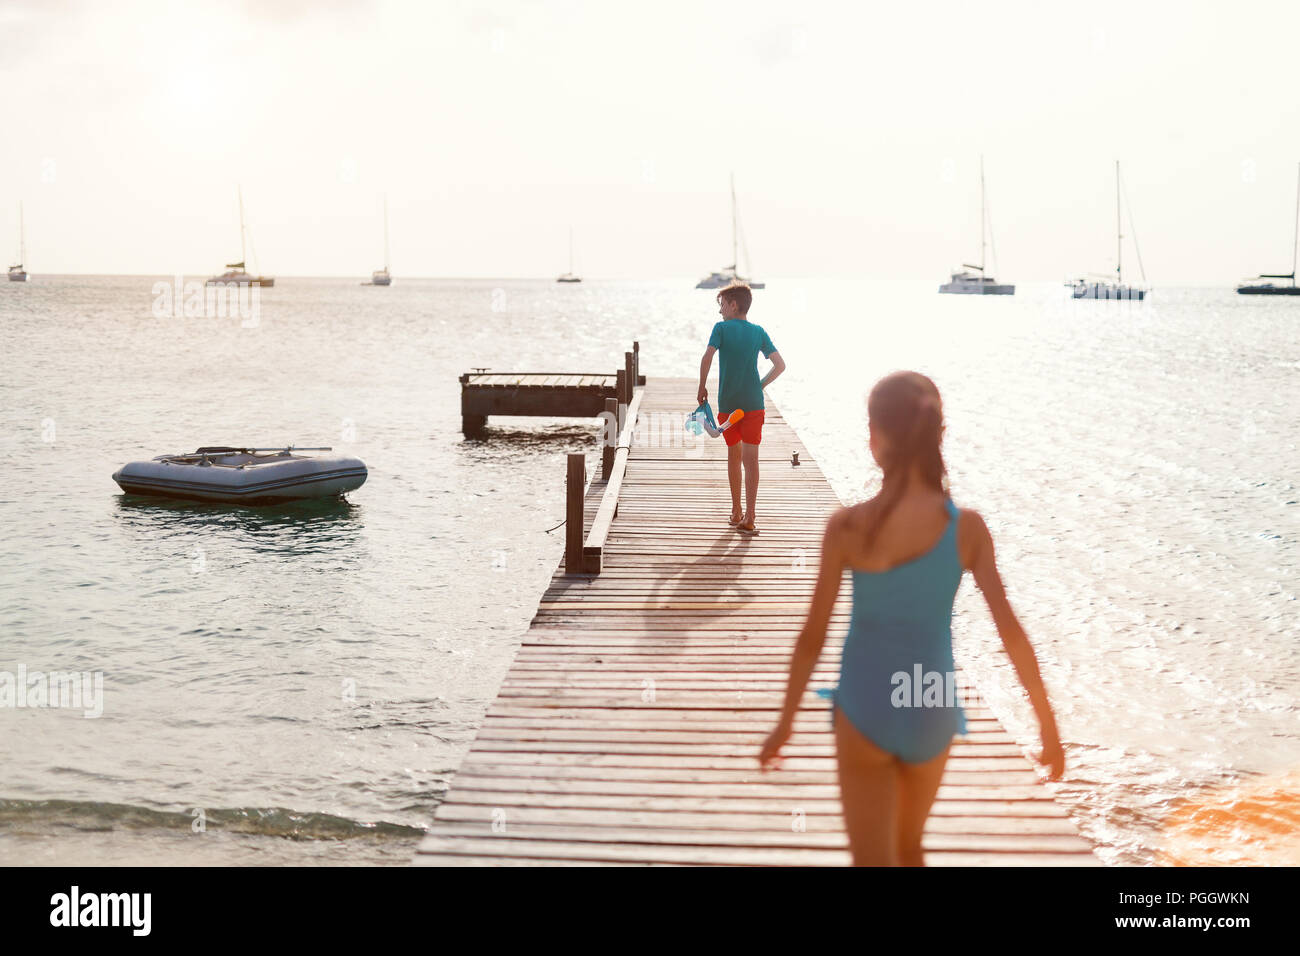 Back view of kids brother and sister on a wooden dock at sunset walking towards sea Stock Photo